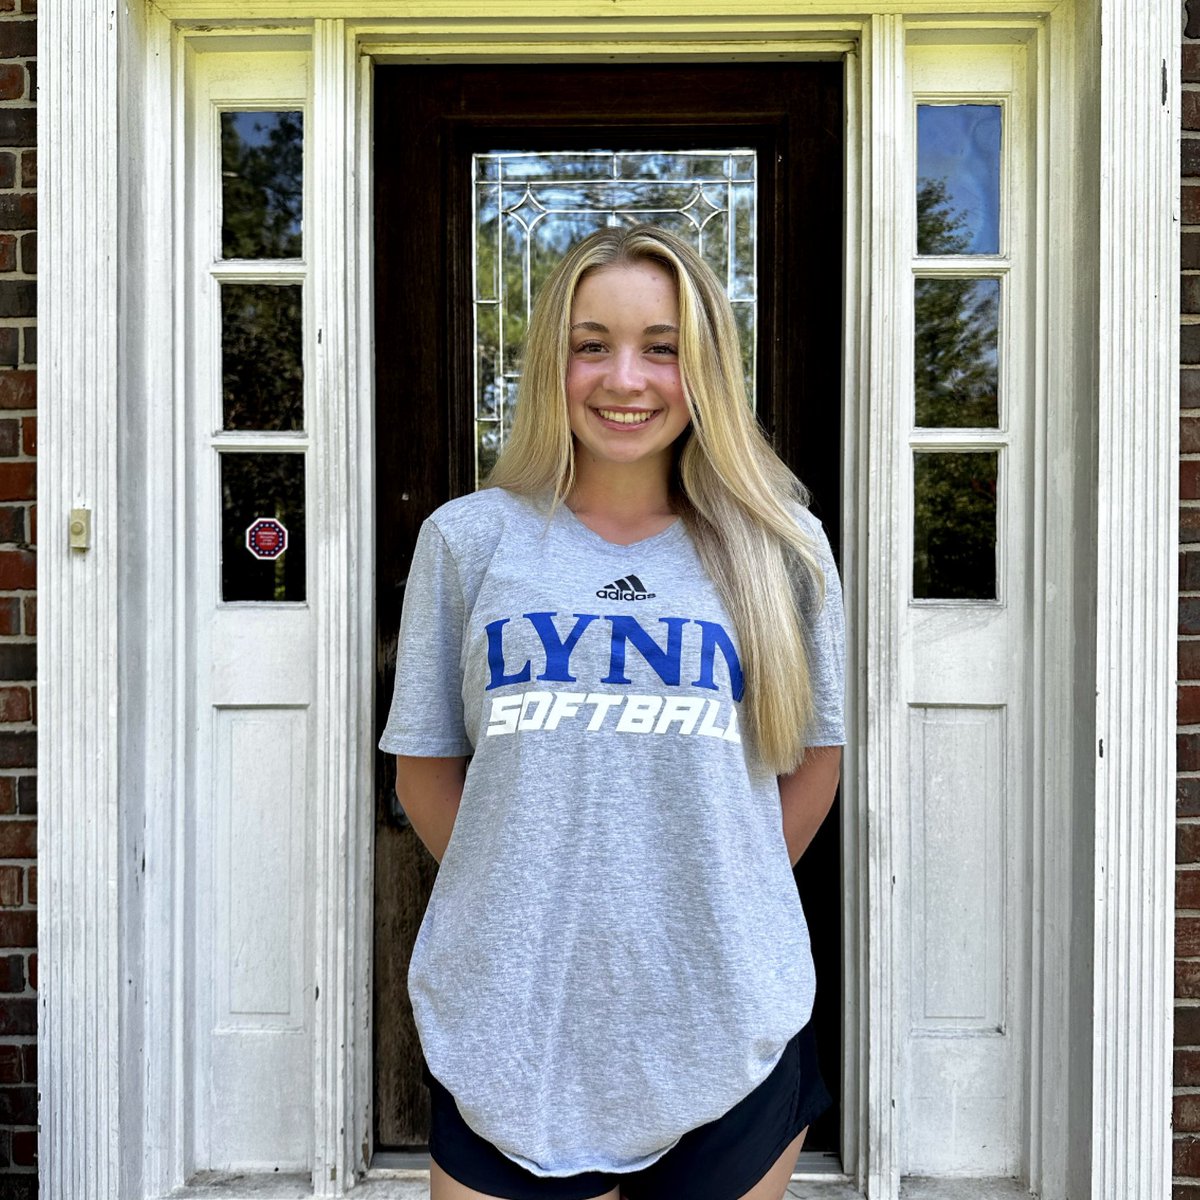 I am so thankful for the opportunity that God has given me to continue my athletic and academic career at Lynn University. Thank you to everyone who has supported me during this journey Go fighting knights! @Lynn_Knights @dacula_softball @ECBulletsPitt04